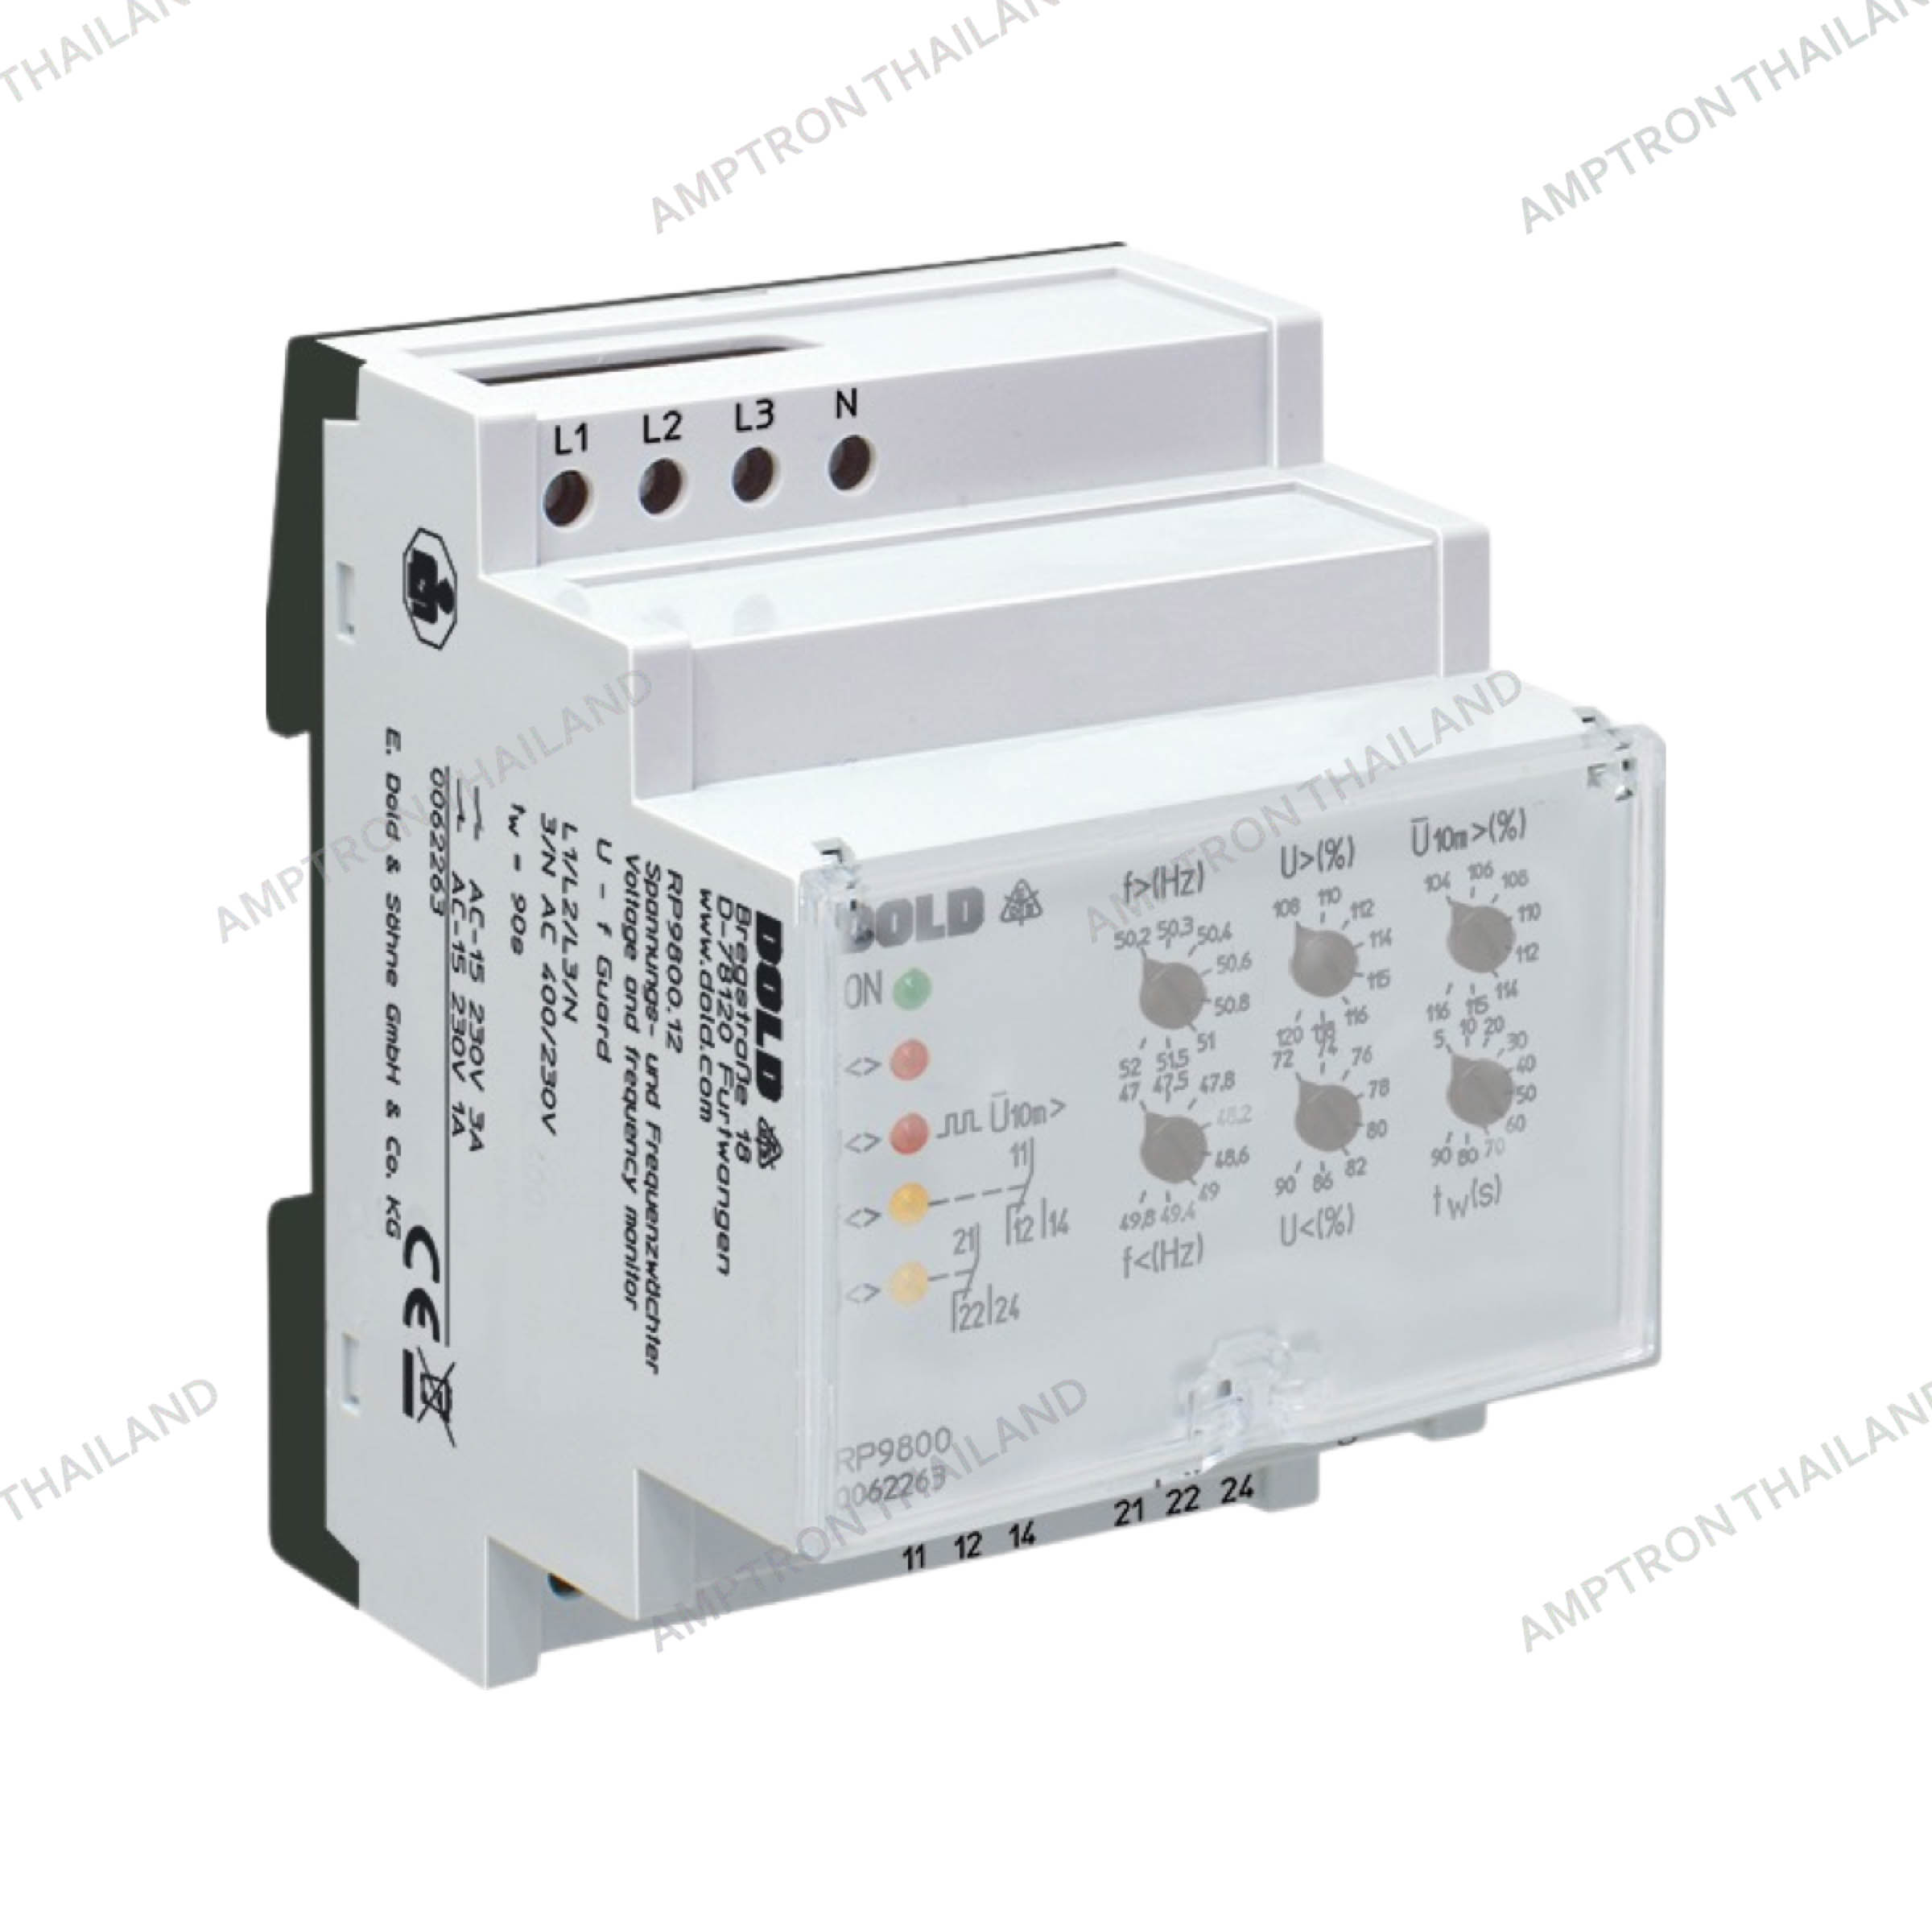 RP 9800  Varimeter  NA Voltage and Frequency Monitor